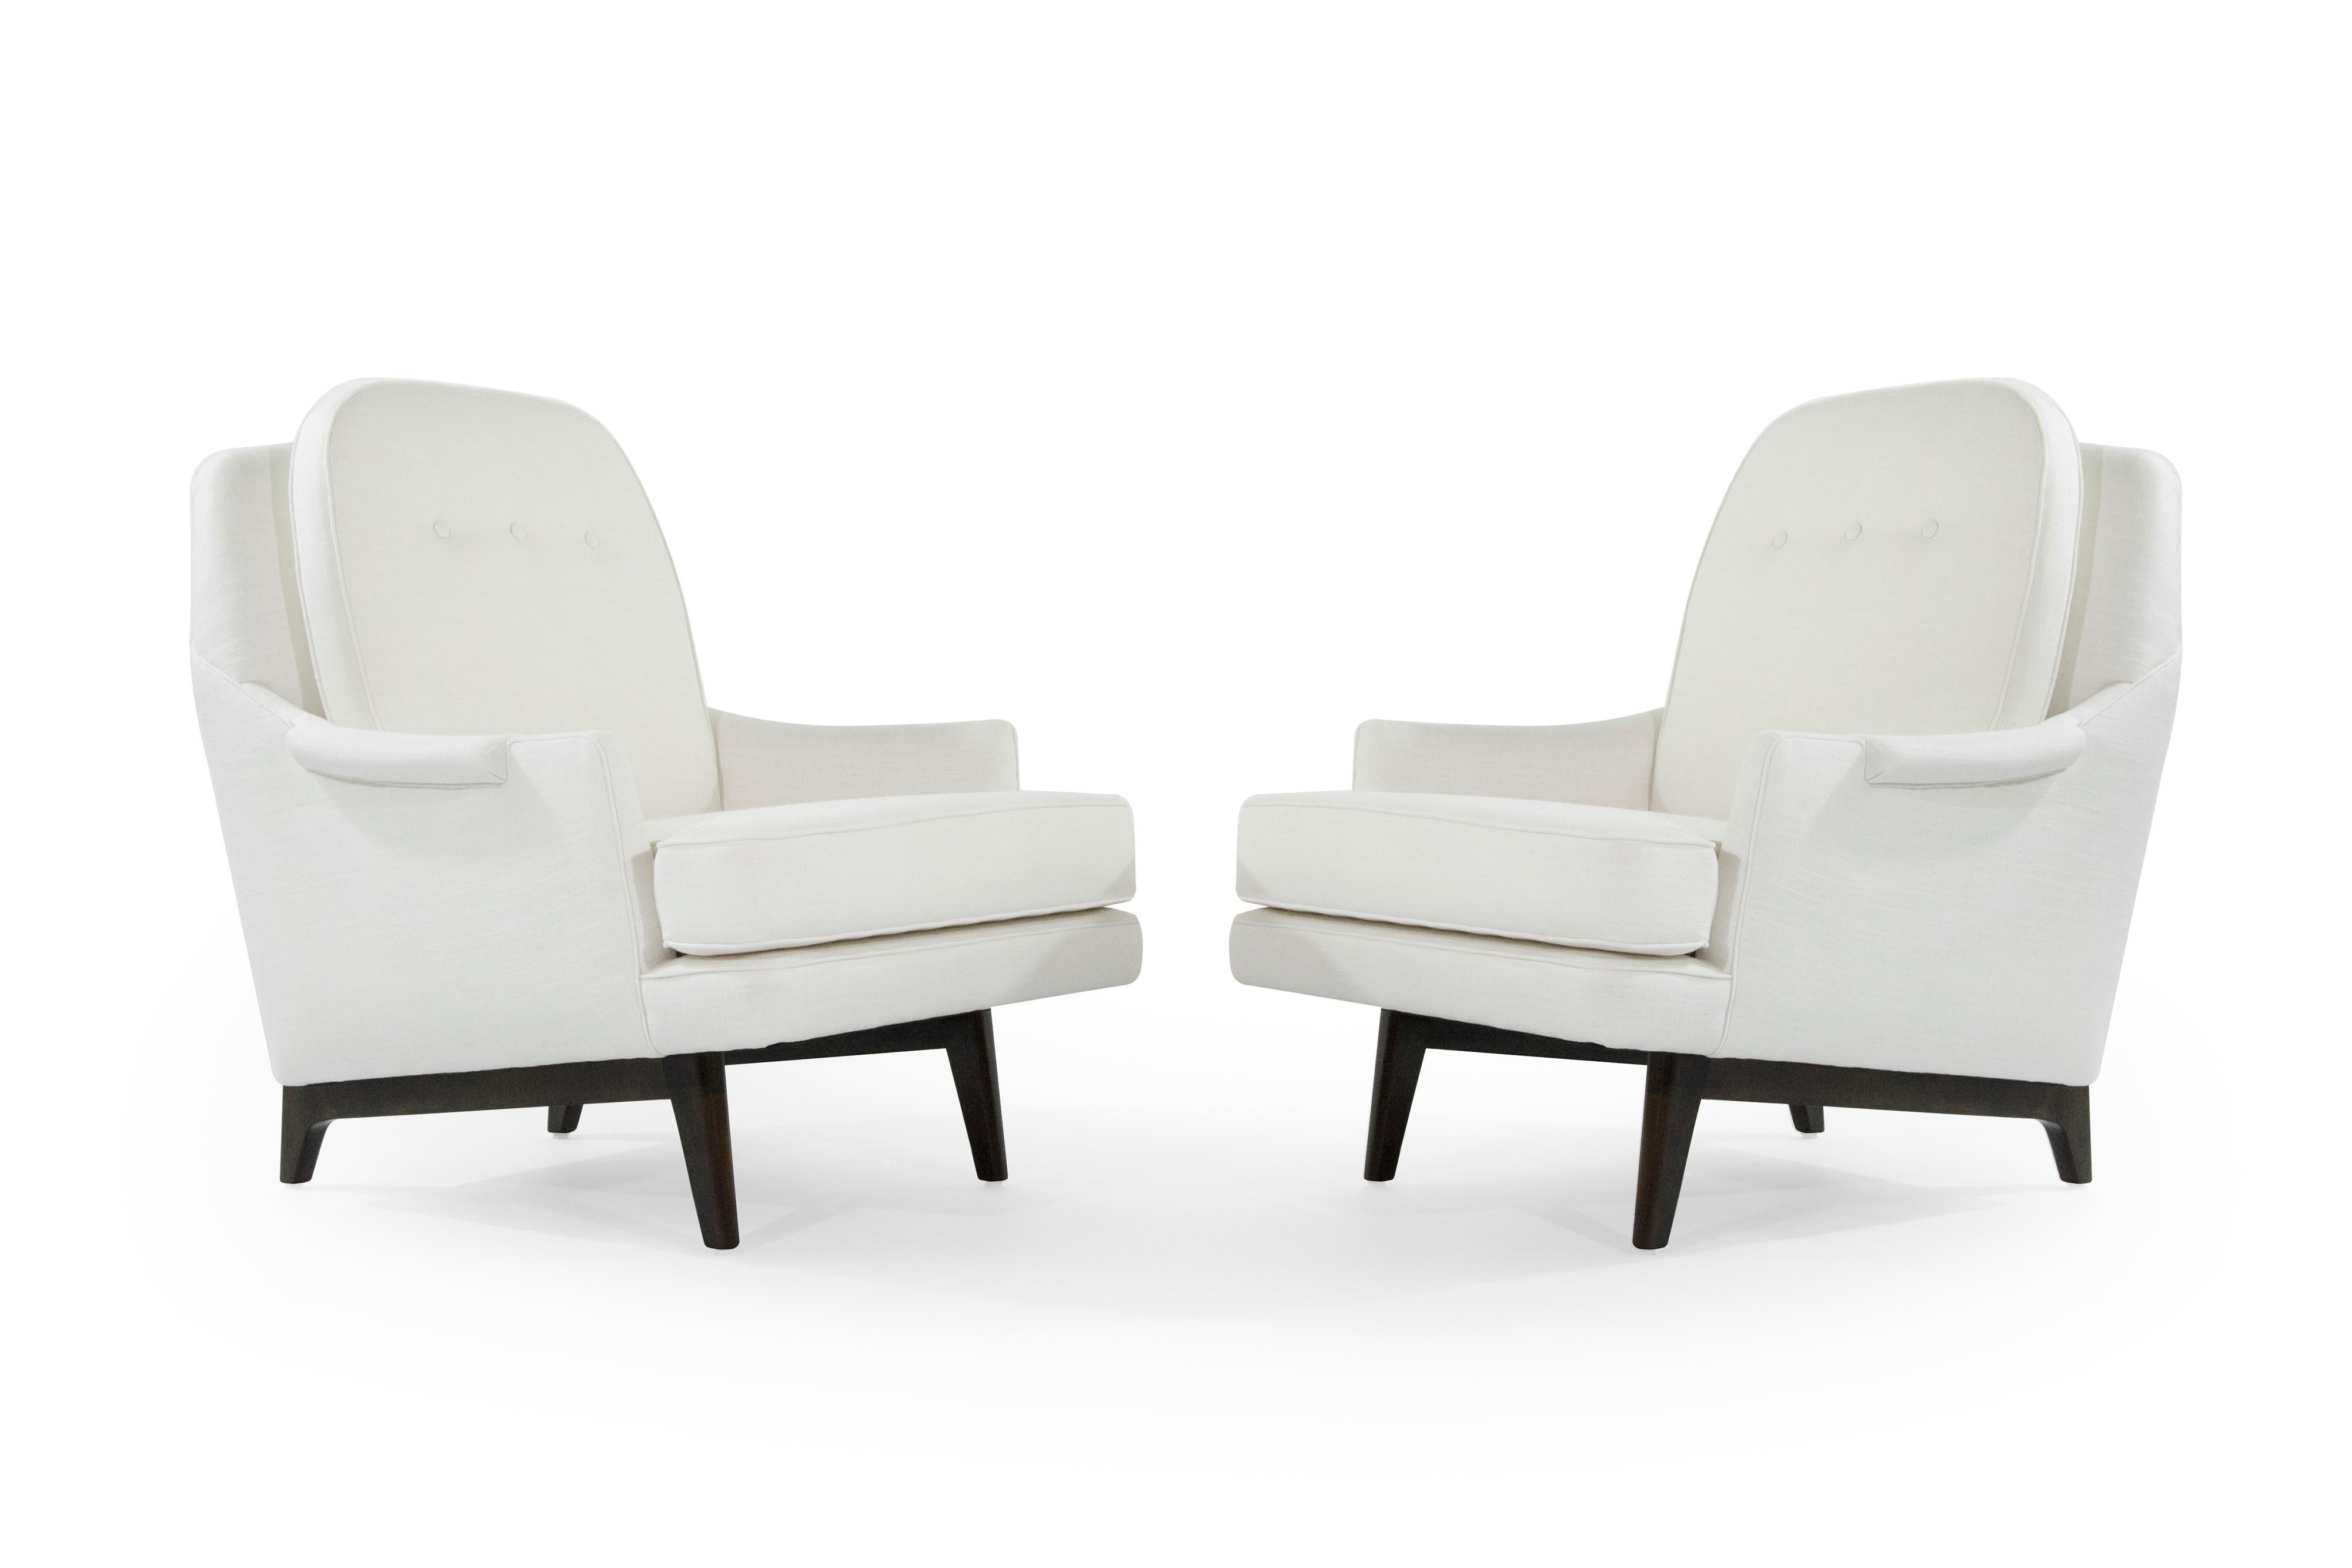 Pair of slopped arm lounges, three button tufted down back, sculptural walnut base, designed by Roger Sprunger for Dunbar, circa 1950s. Very comfortable set, perfect in a library setting.
Newly upholstered in off-white linen.
 